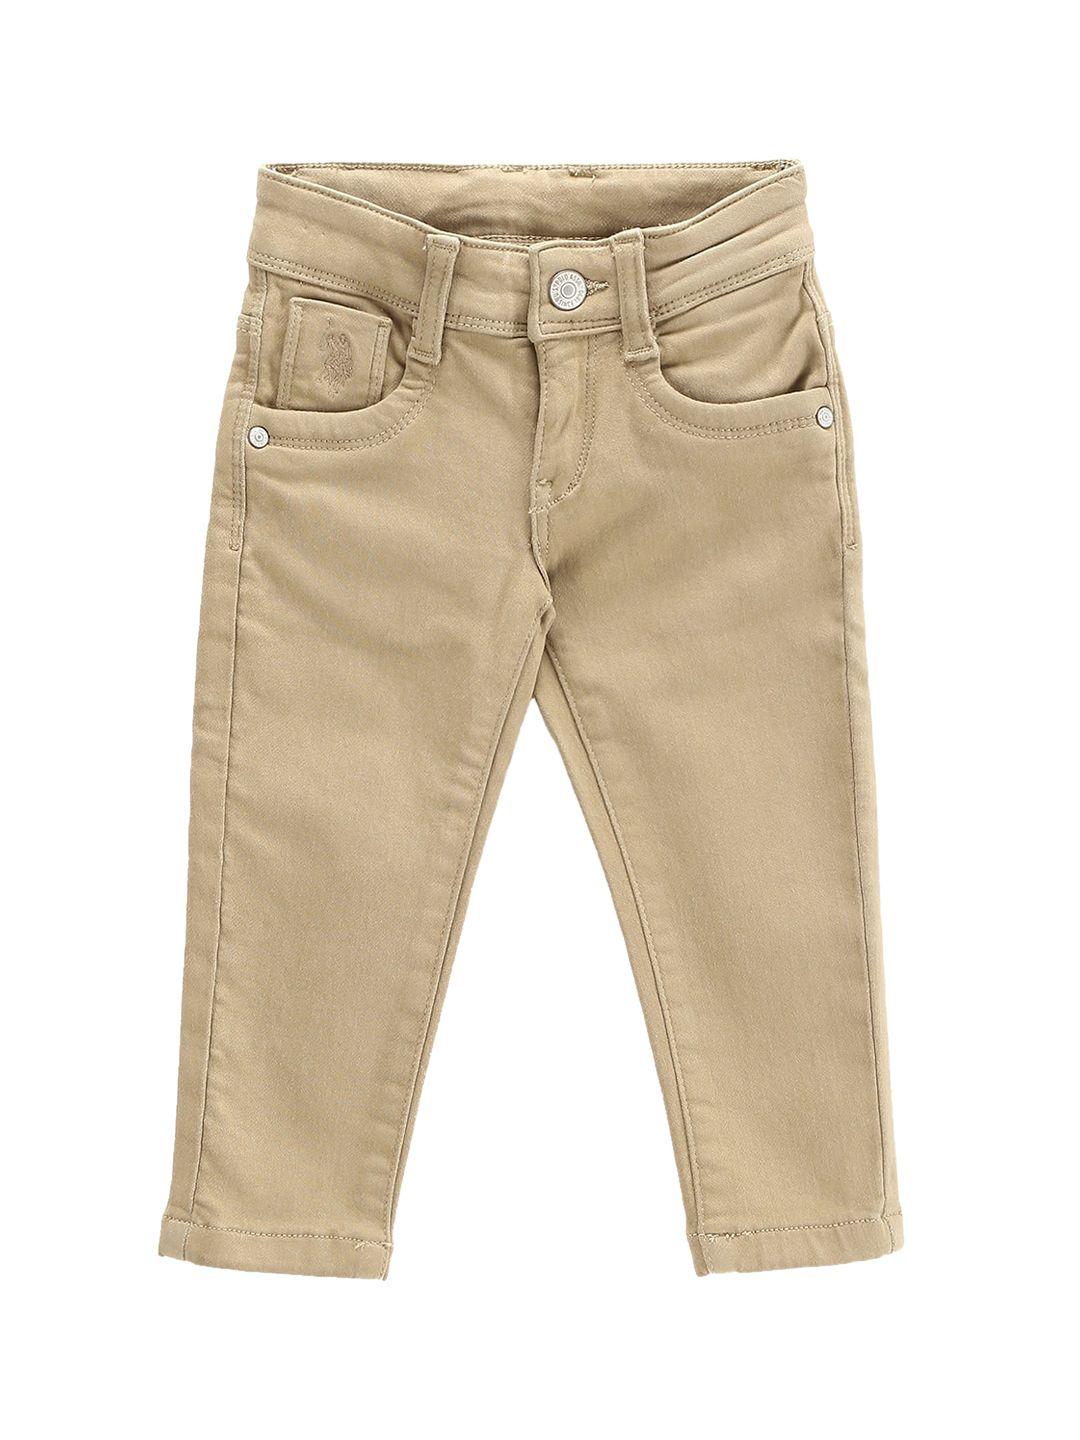 u.s. polo assn. kids boys slim fit clean look stretchable jeans